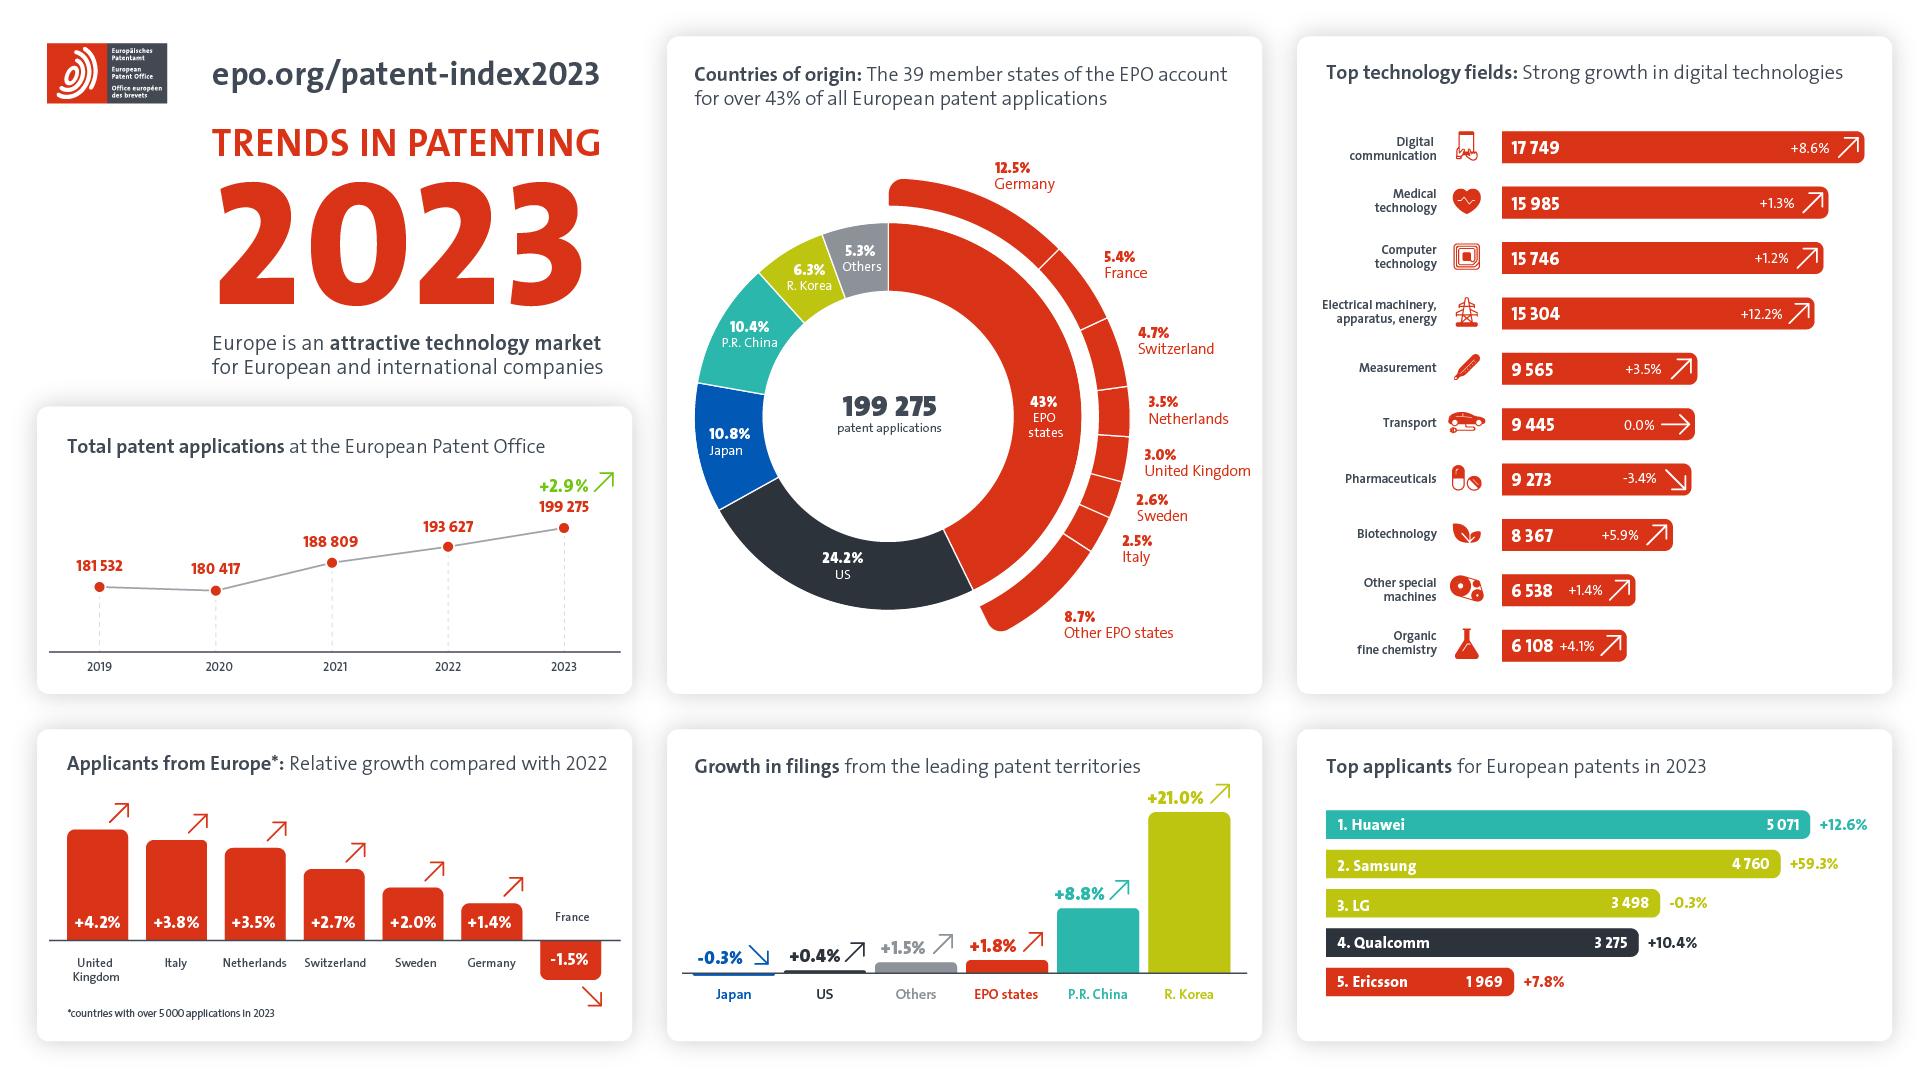 Key figures infographic of key trends for patenting in 2023.